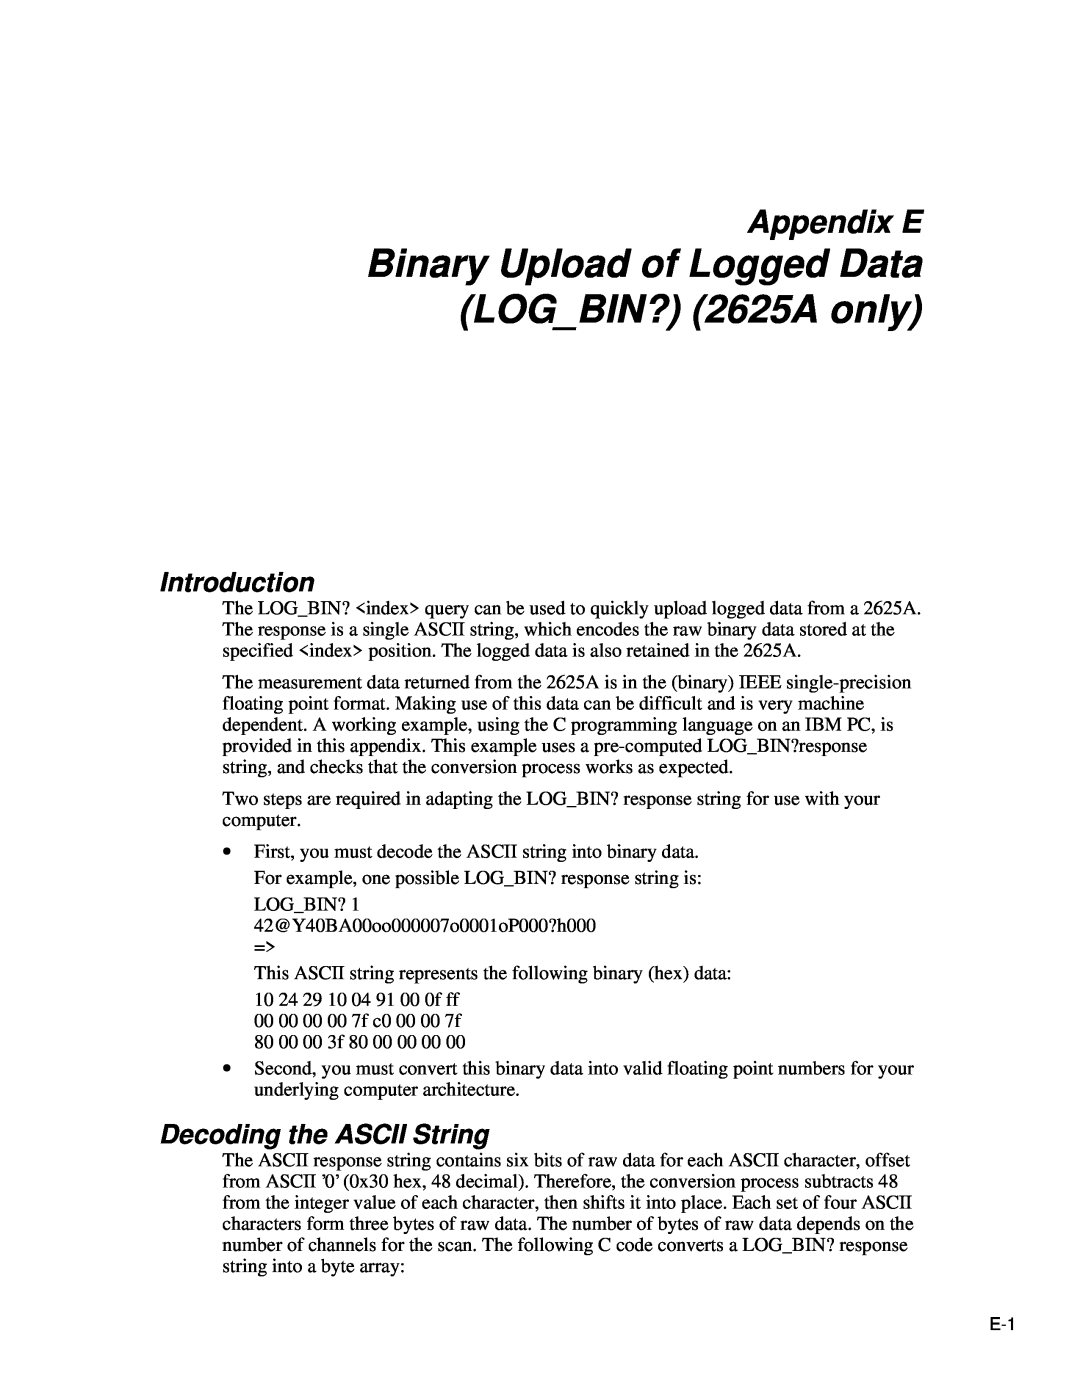 Fluke 2620A Binary Upload of Logged Data LOGBIN? 2625A only, Appendix E, Decoding the ASCII String, Introduction 